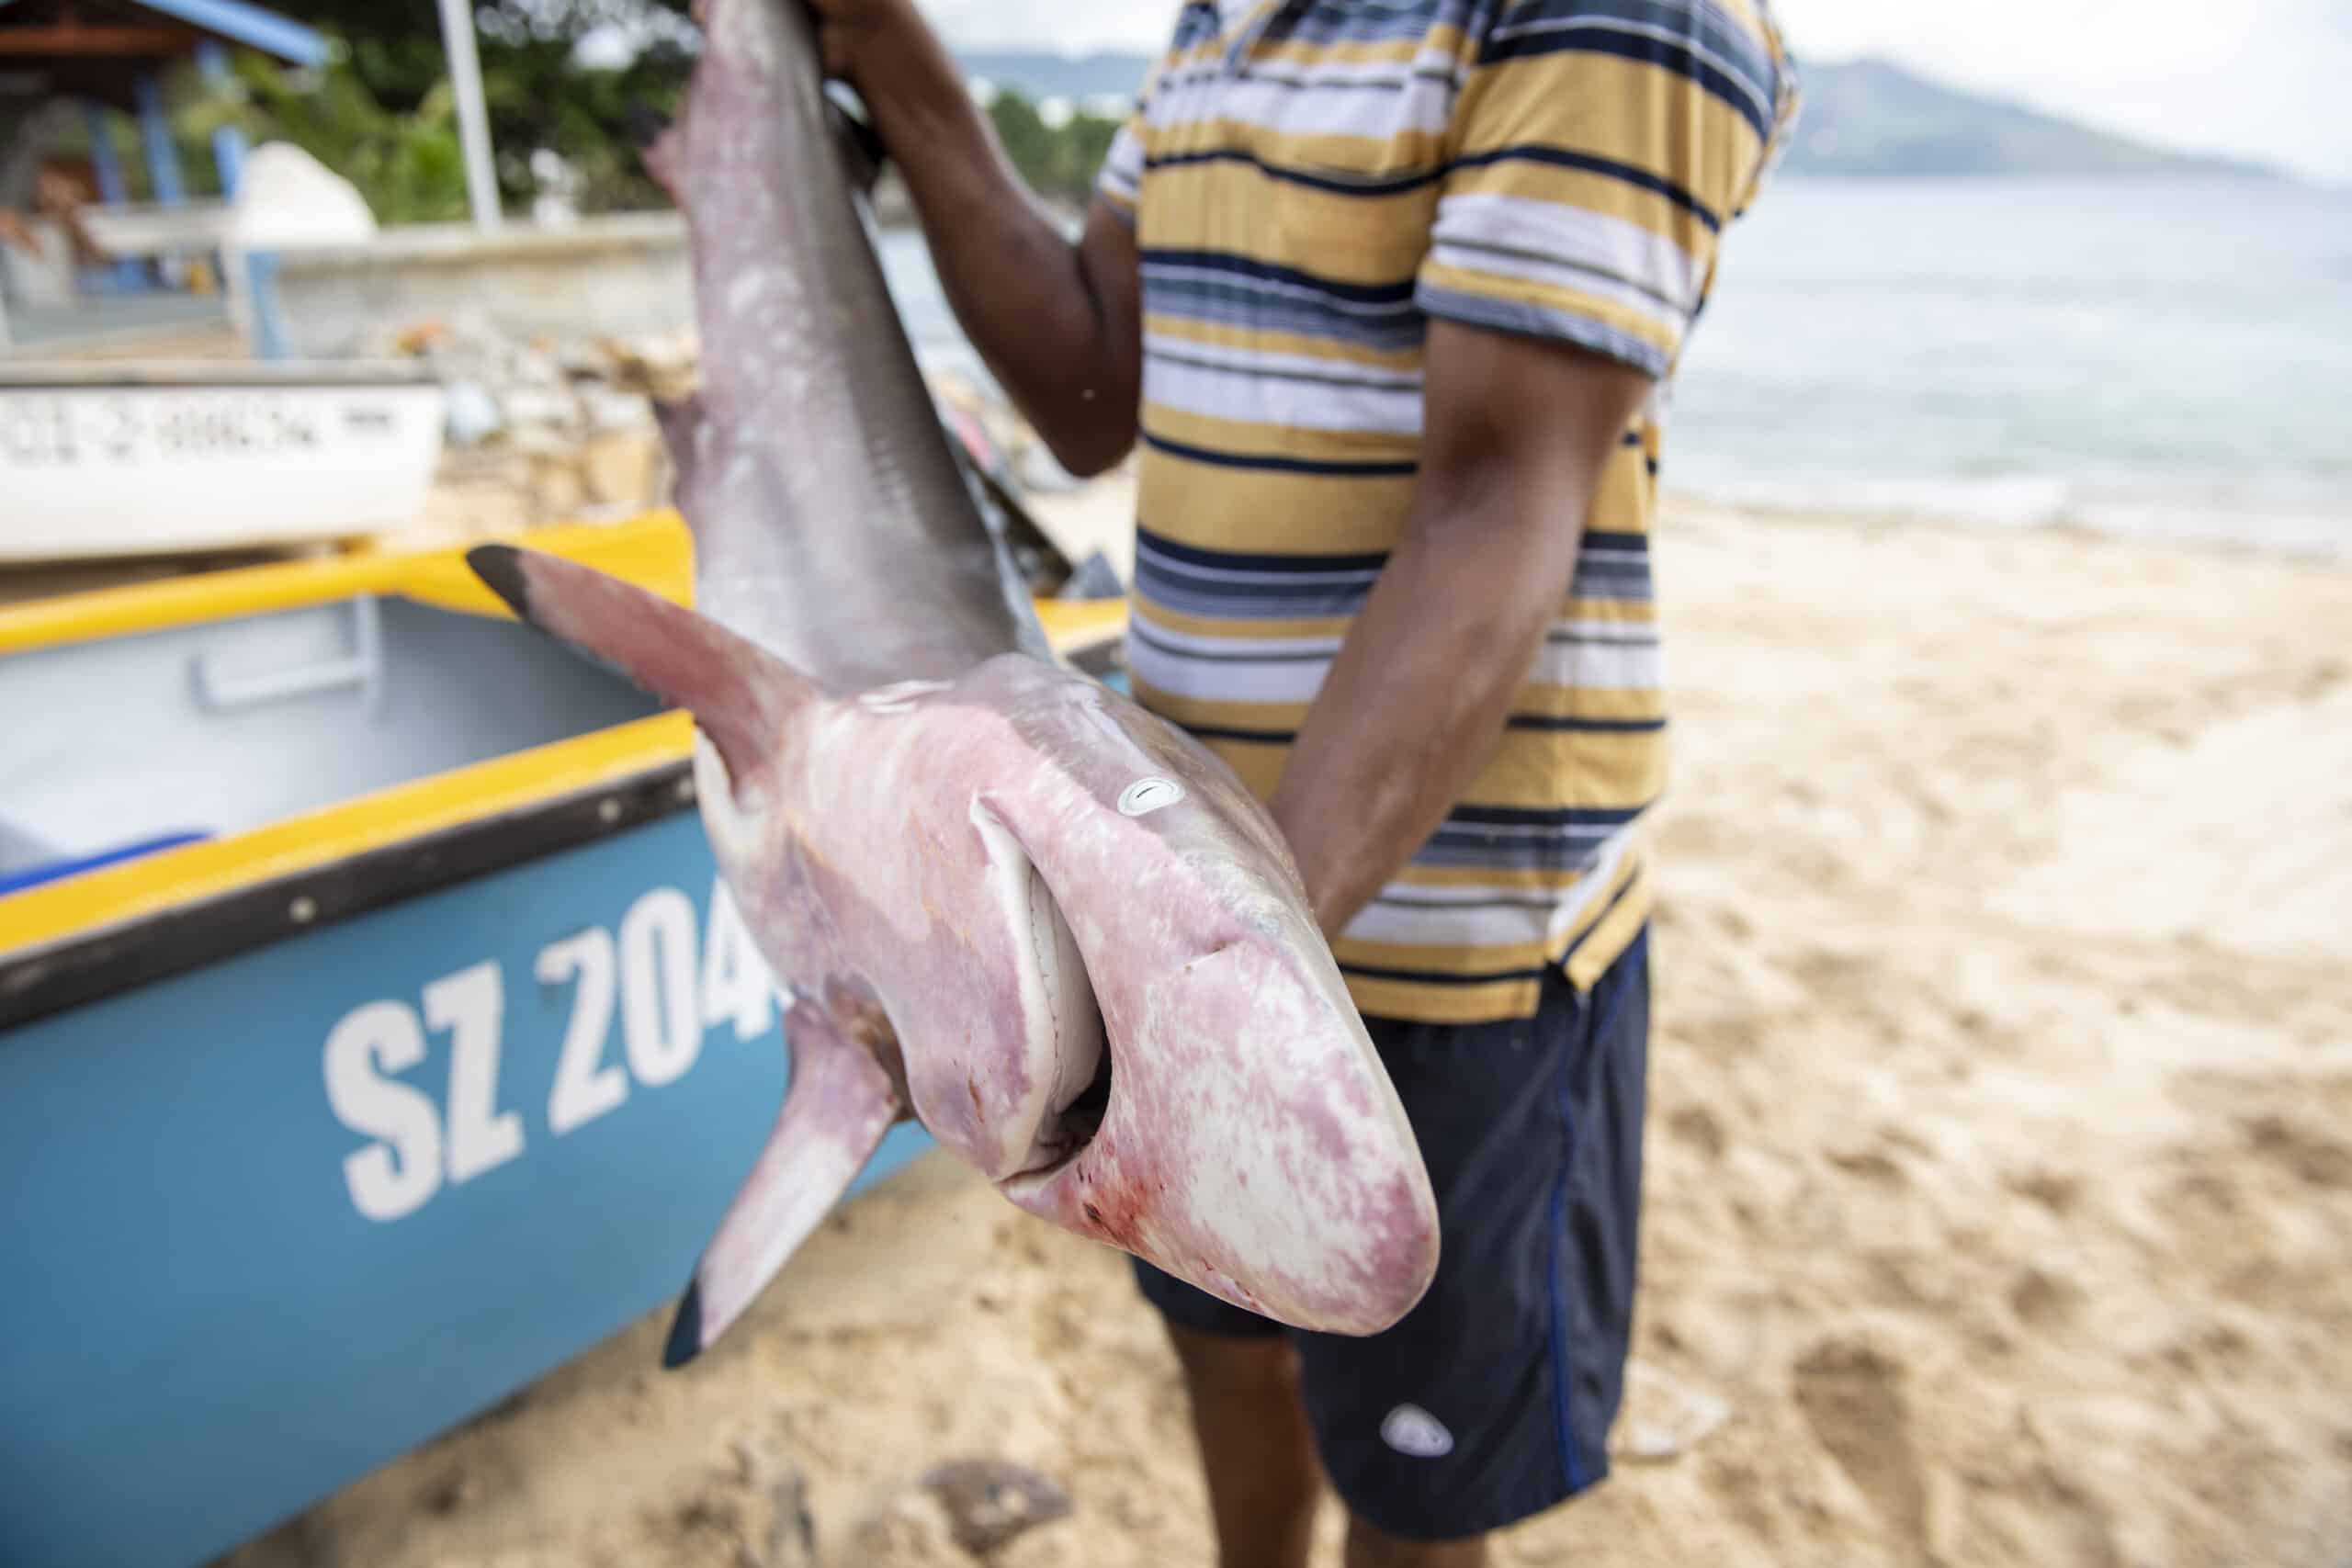 seychelles-sustainable-fishing-documentary-reportage-photography-hannah-maule-ffinch